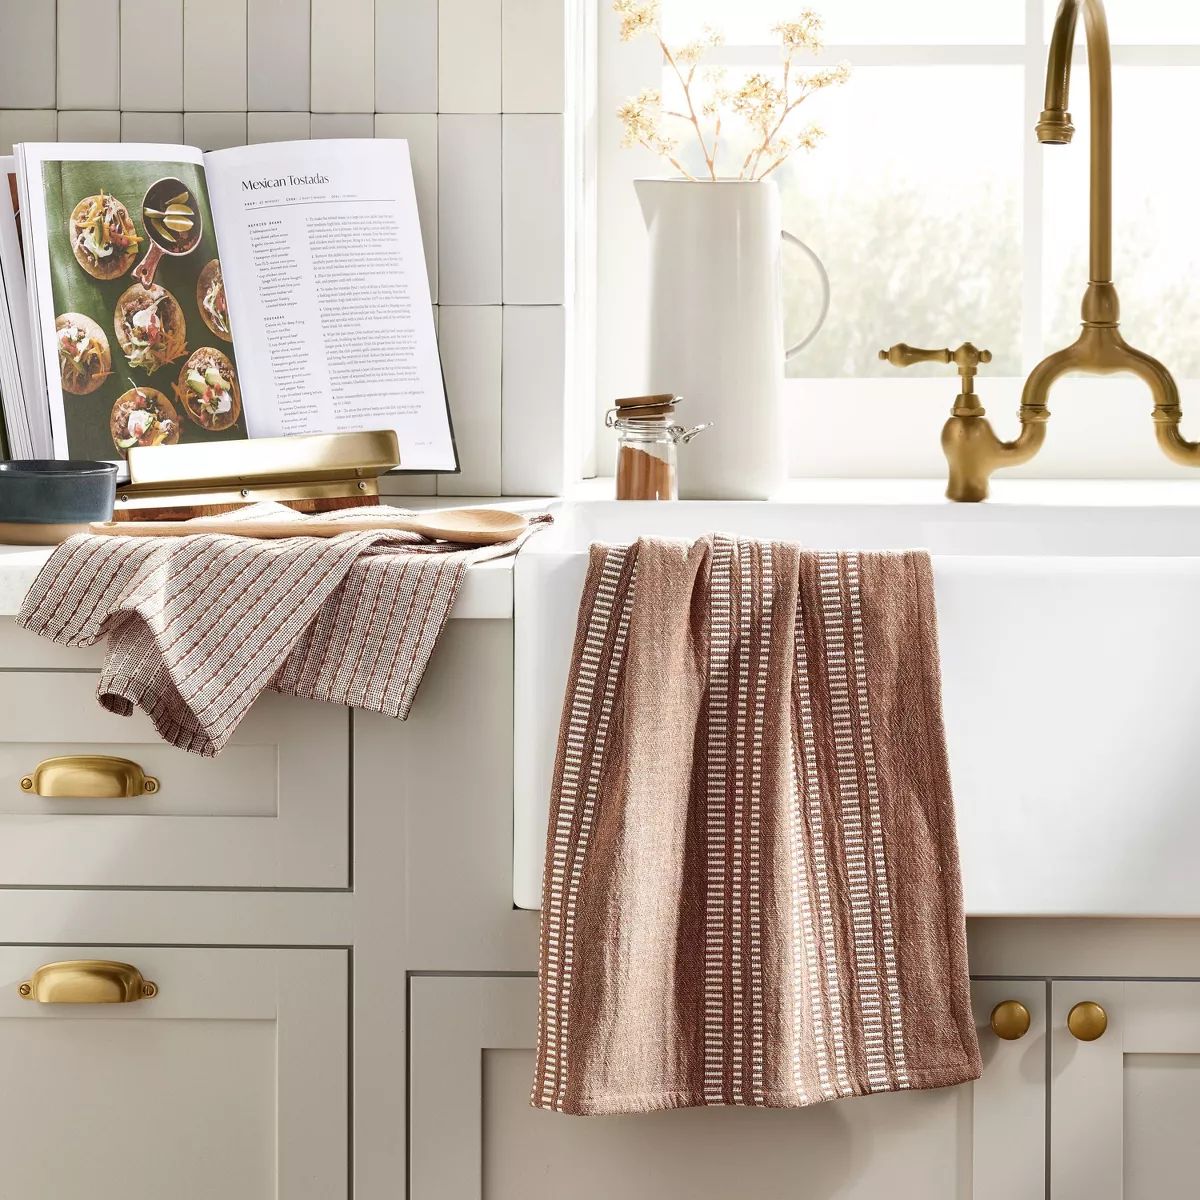 2ct Assorted Fall Stripe Kitchen Towel Set Pumpkin Brown - Hearth & Hand™ with Magnolia | Target